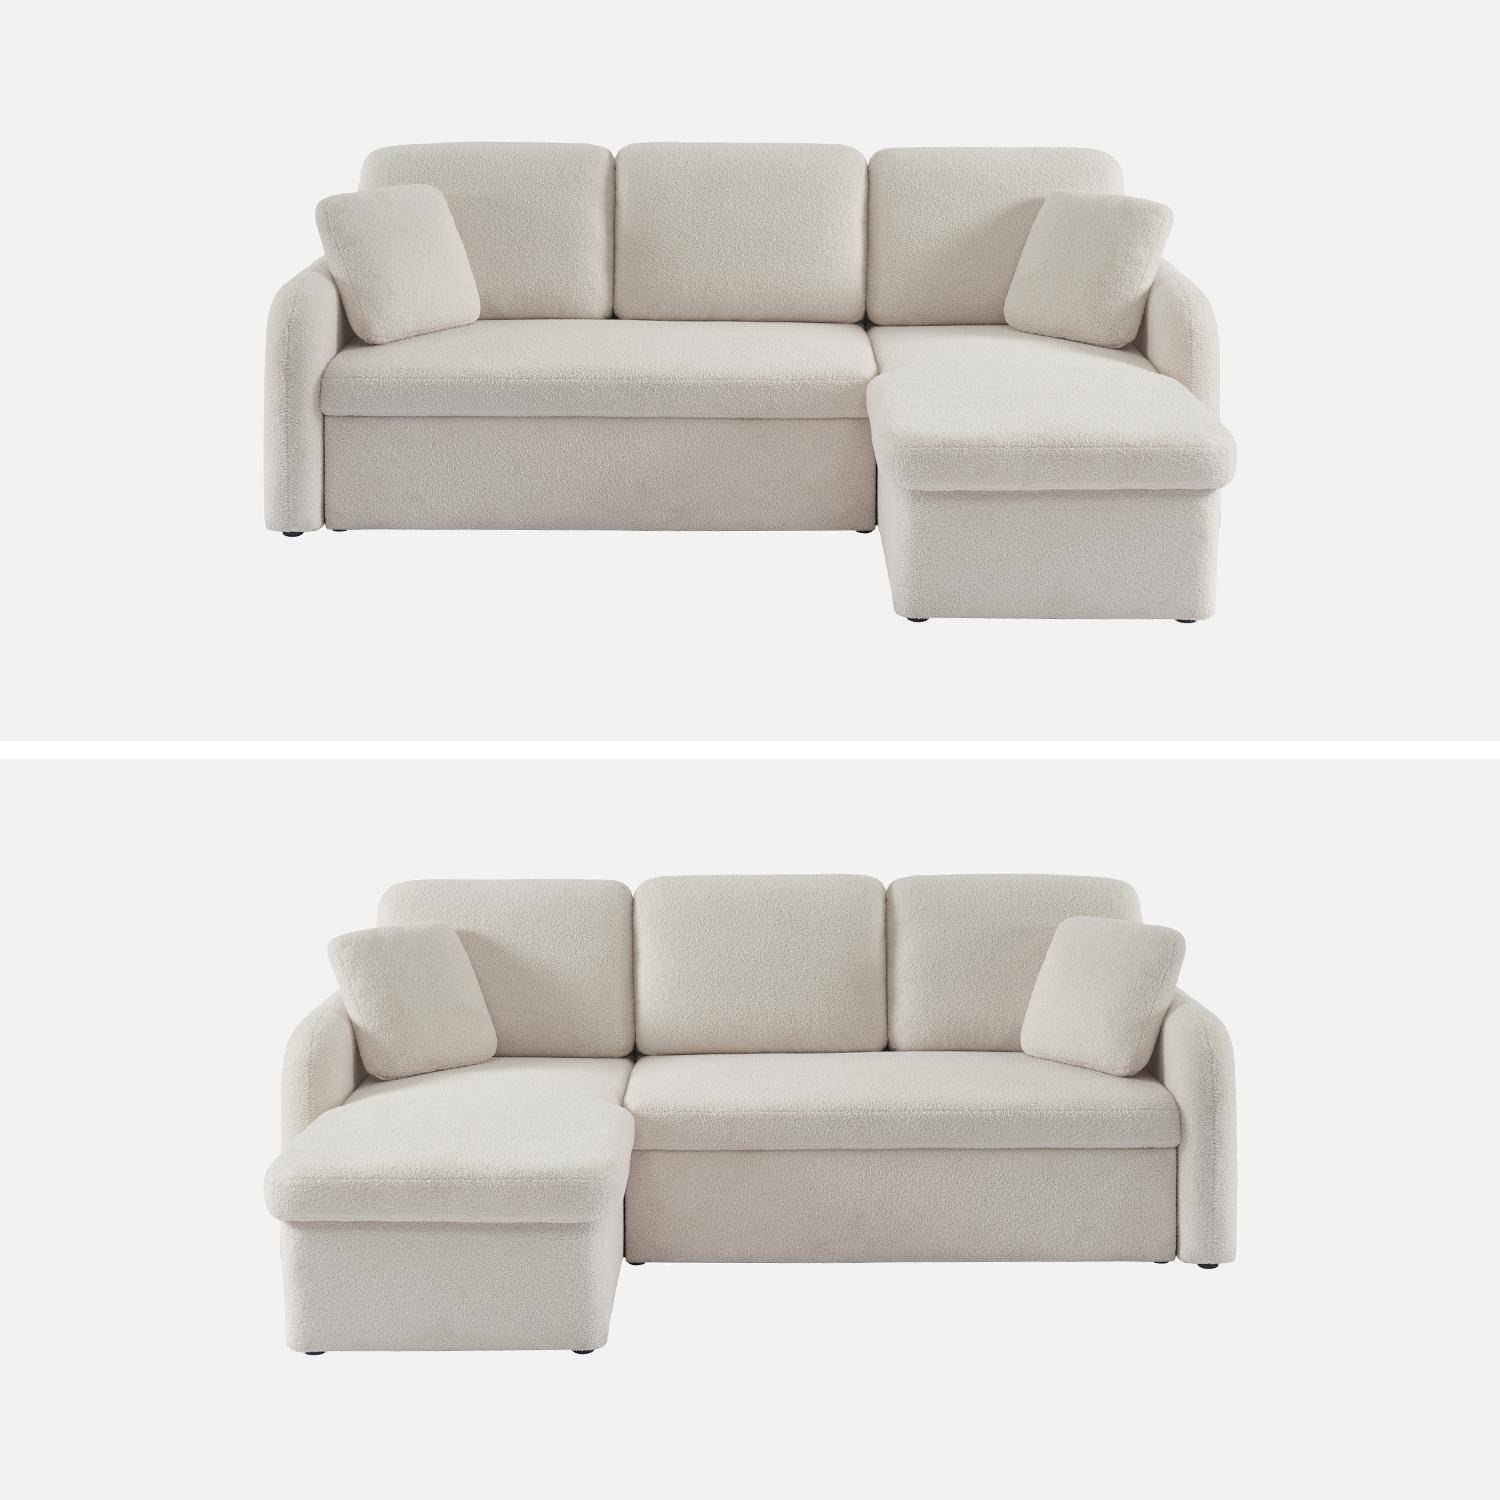 3-seater reversible corner sofa bed with storage box - Milano, Ecru, boucle fabric, rounded lines Photo5